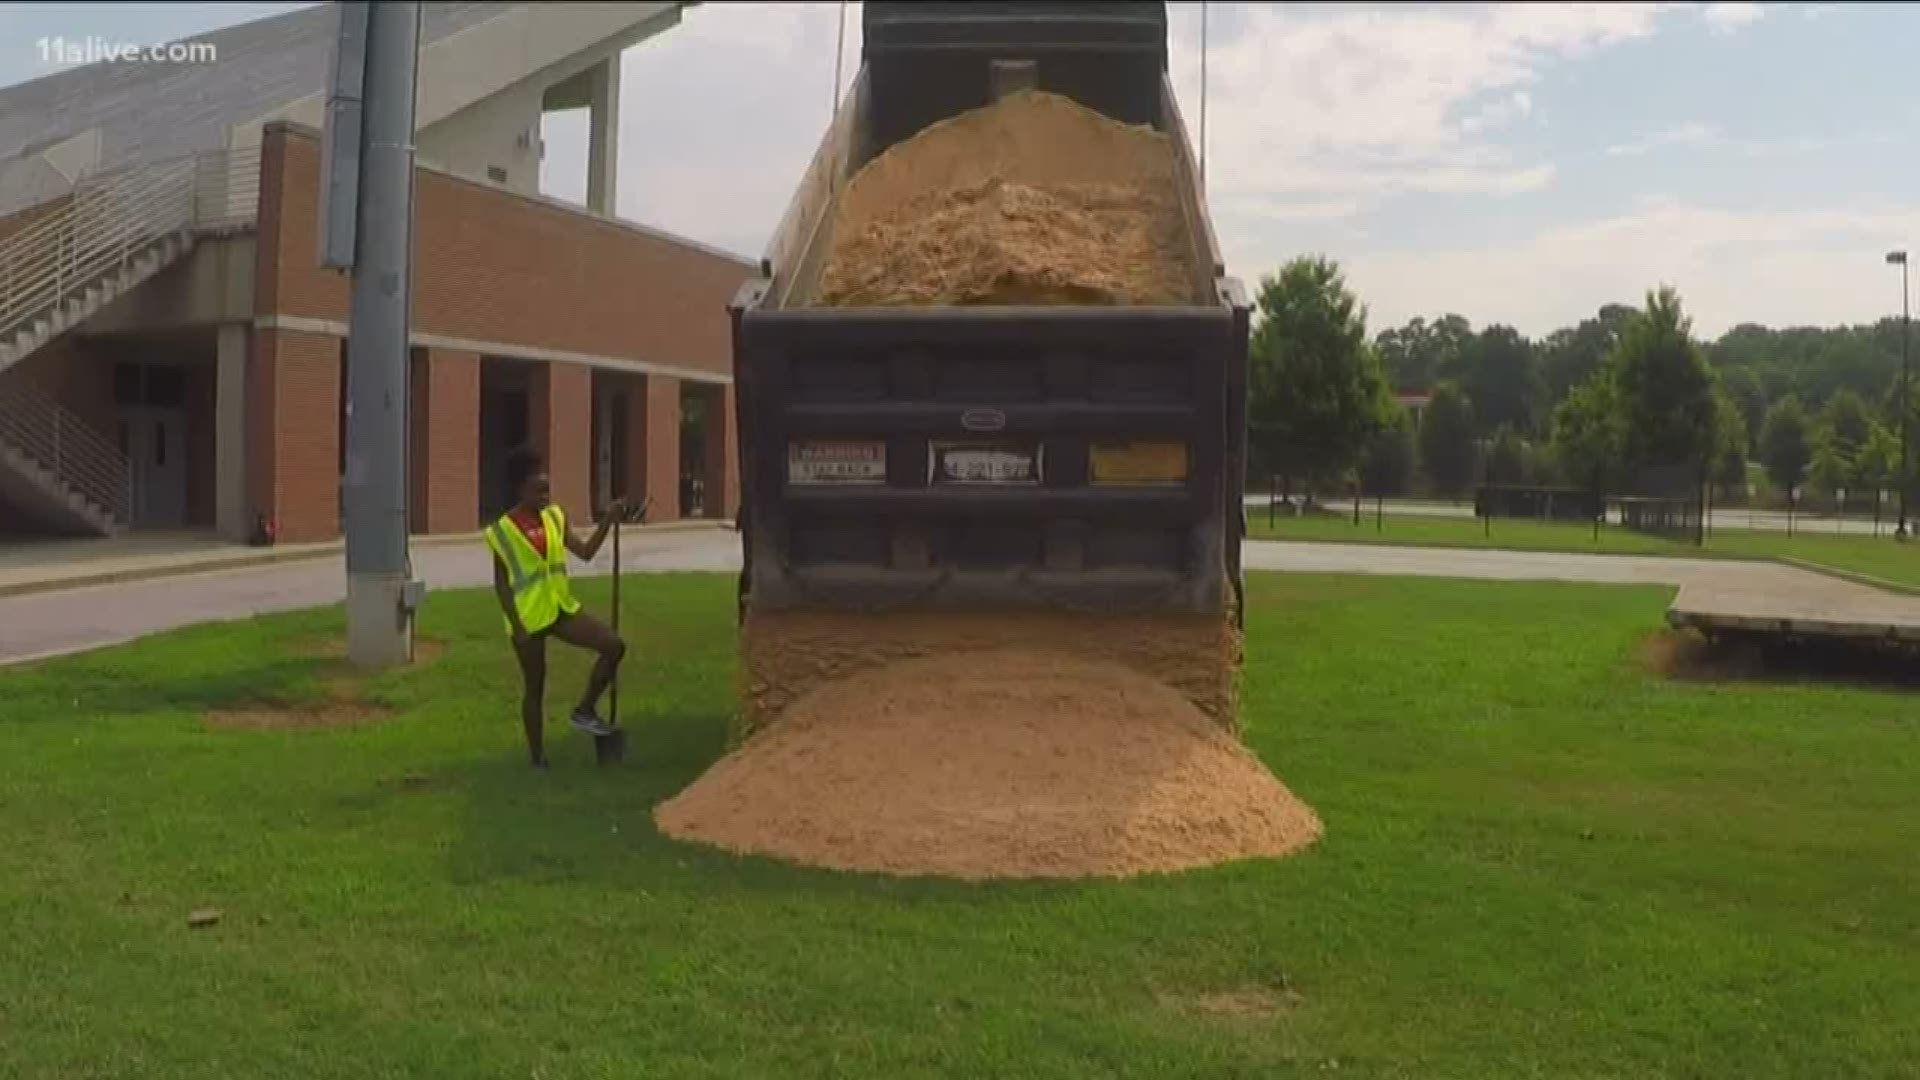 Just over 30 tons of premium sand for the pits used by the jumpers who compete in track and field will be put to good use.